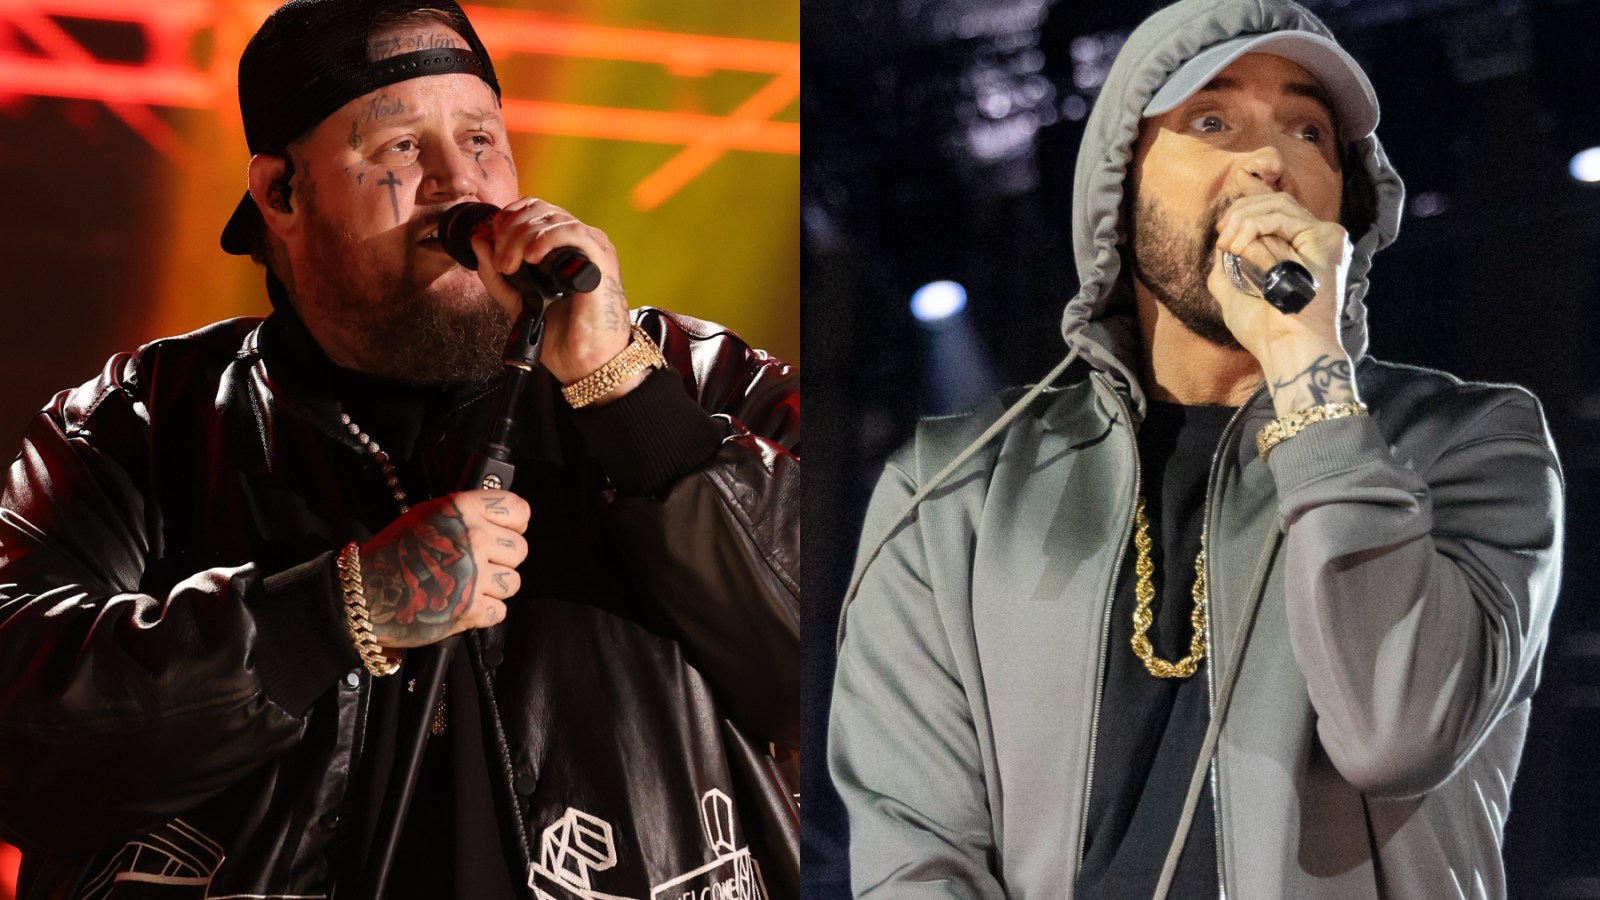 Jelly Roll ‘Couldn’t Imagine’ Eminem Wanted to Web With Him